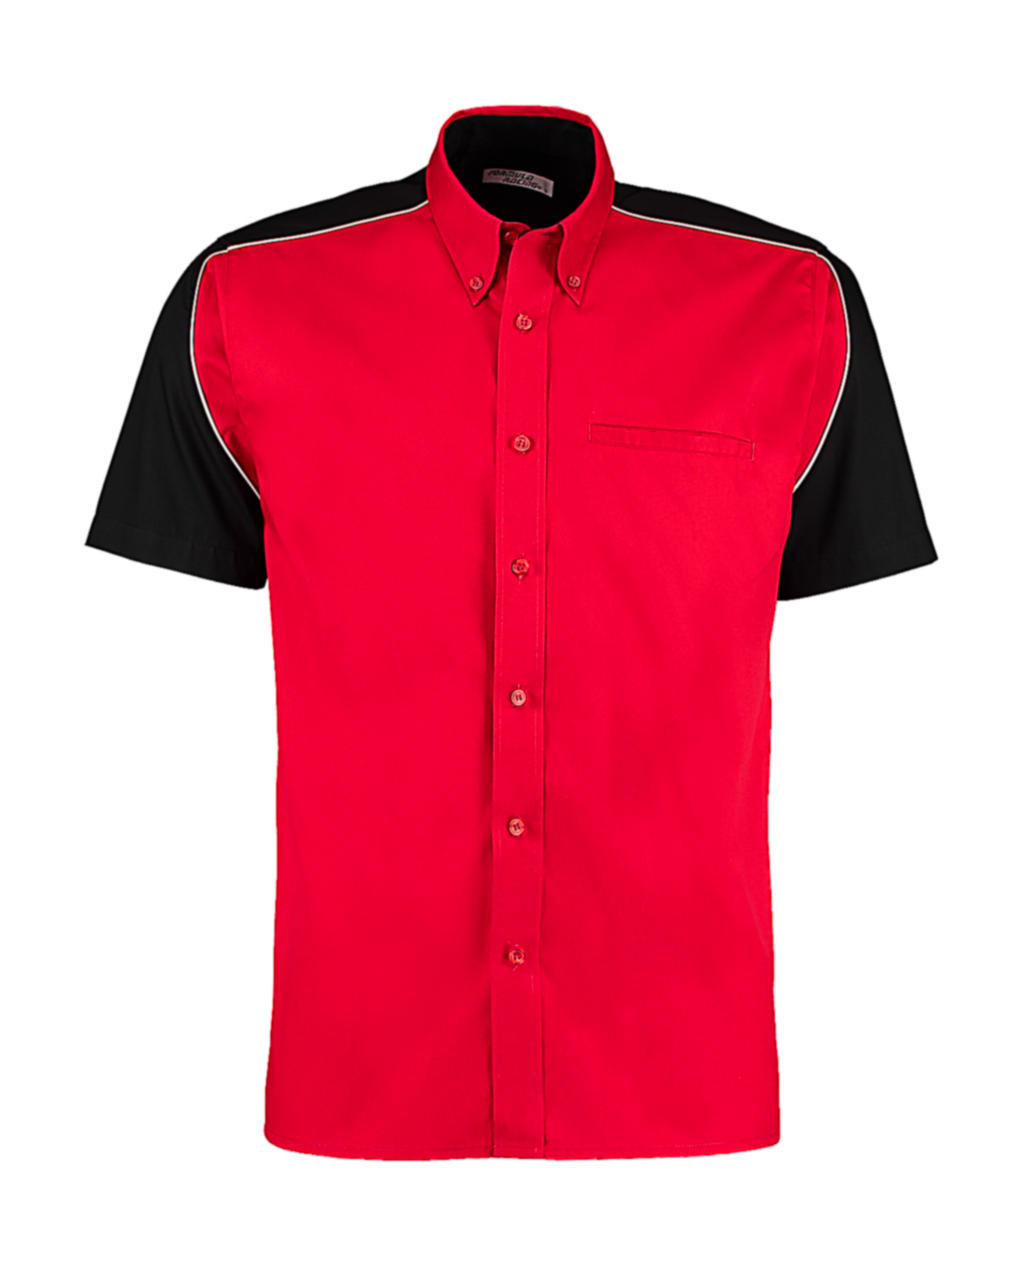  Classic Fit Sebring Shirt SSL in Farbe Red/Black/White